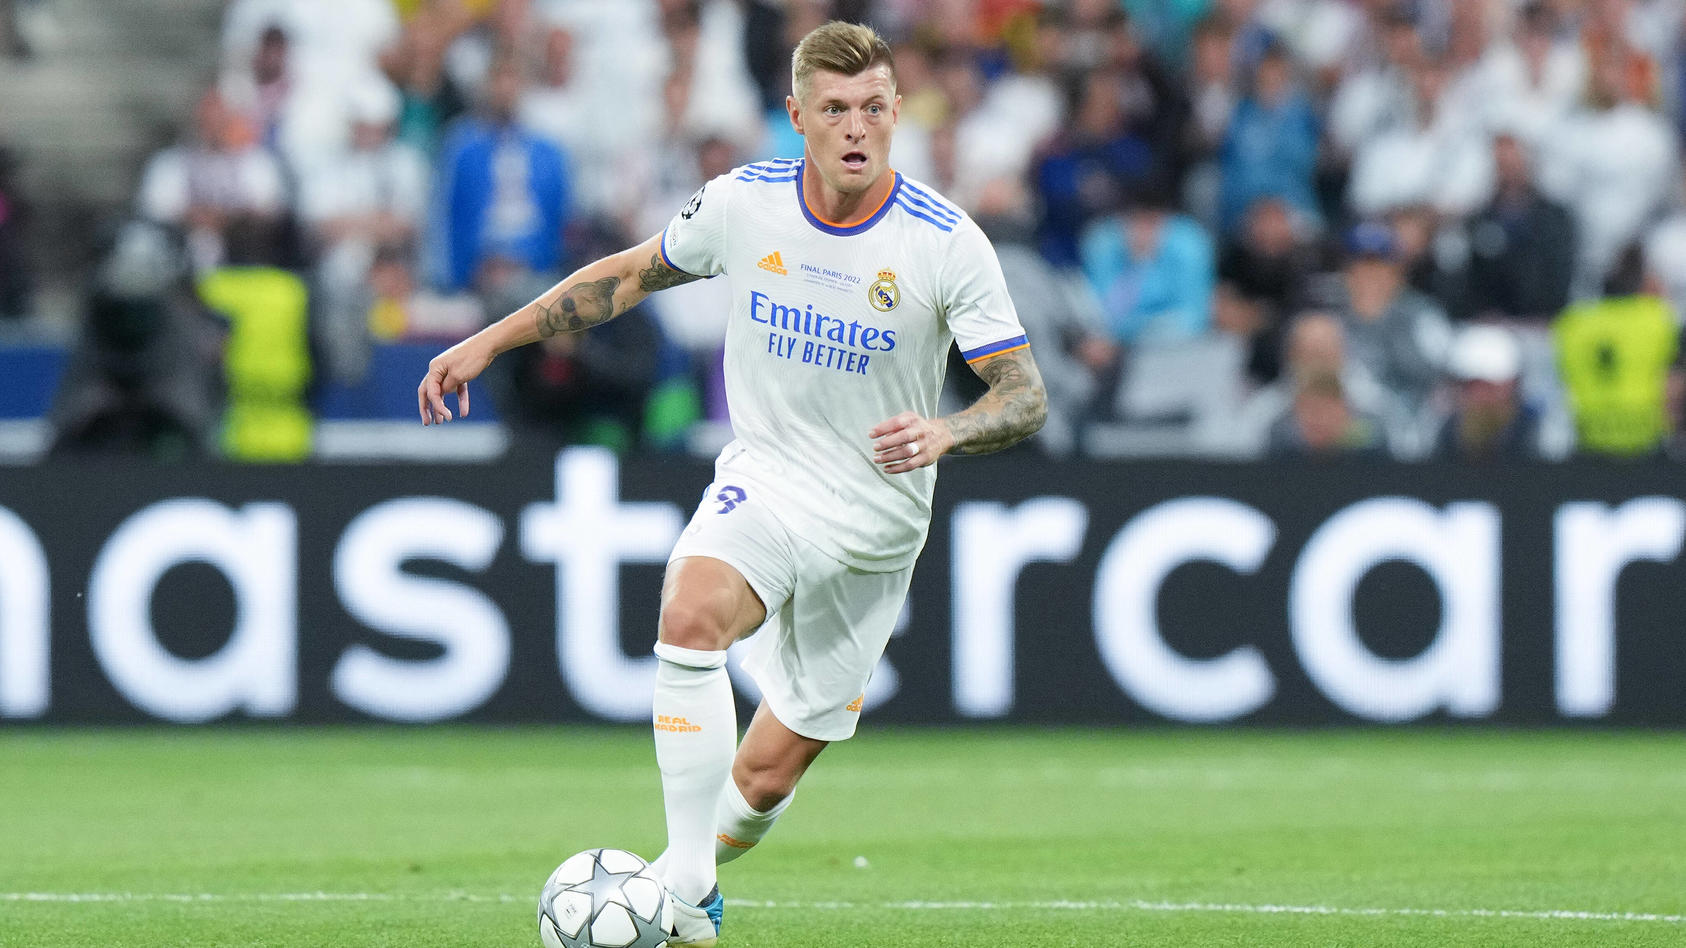  Toni Kroos of Real Madrid CF during the UEFA Champions League Final match between Liverpool FC and Real Madrid CF at Stade de France on May 28, 2022 in Paris, France. Photo by Giuseppe Maffia. Paris Stade de France Paris France Copyright: xGiuseppex